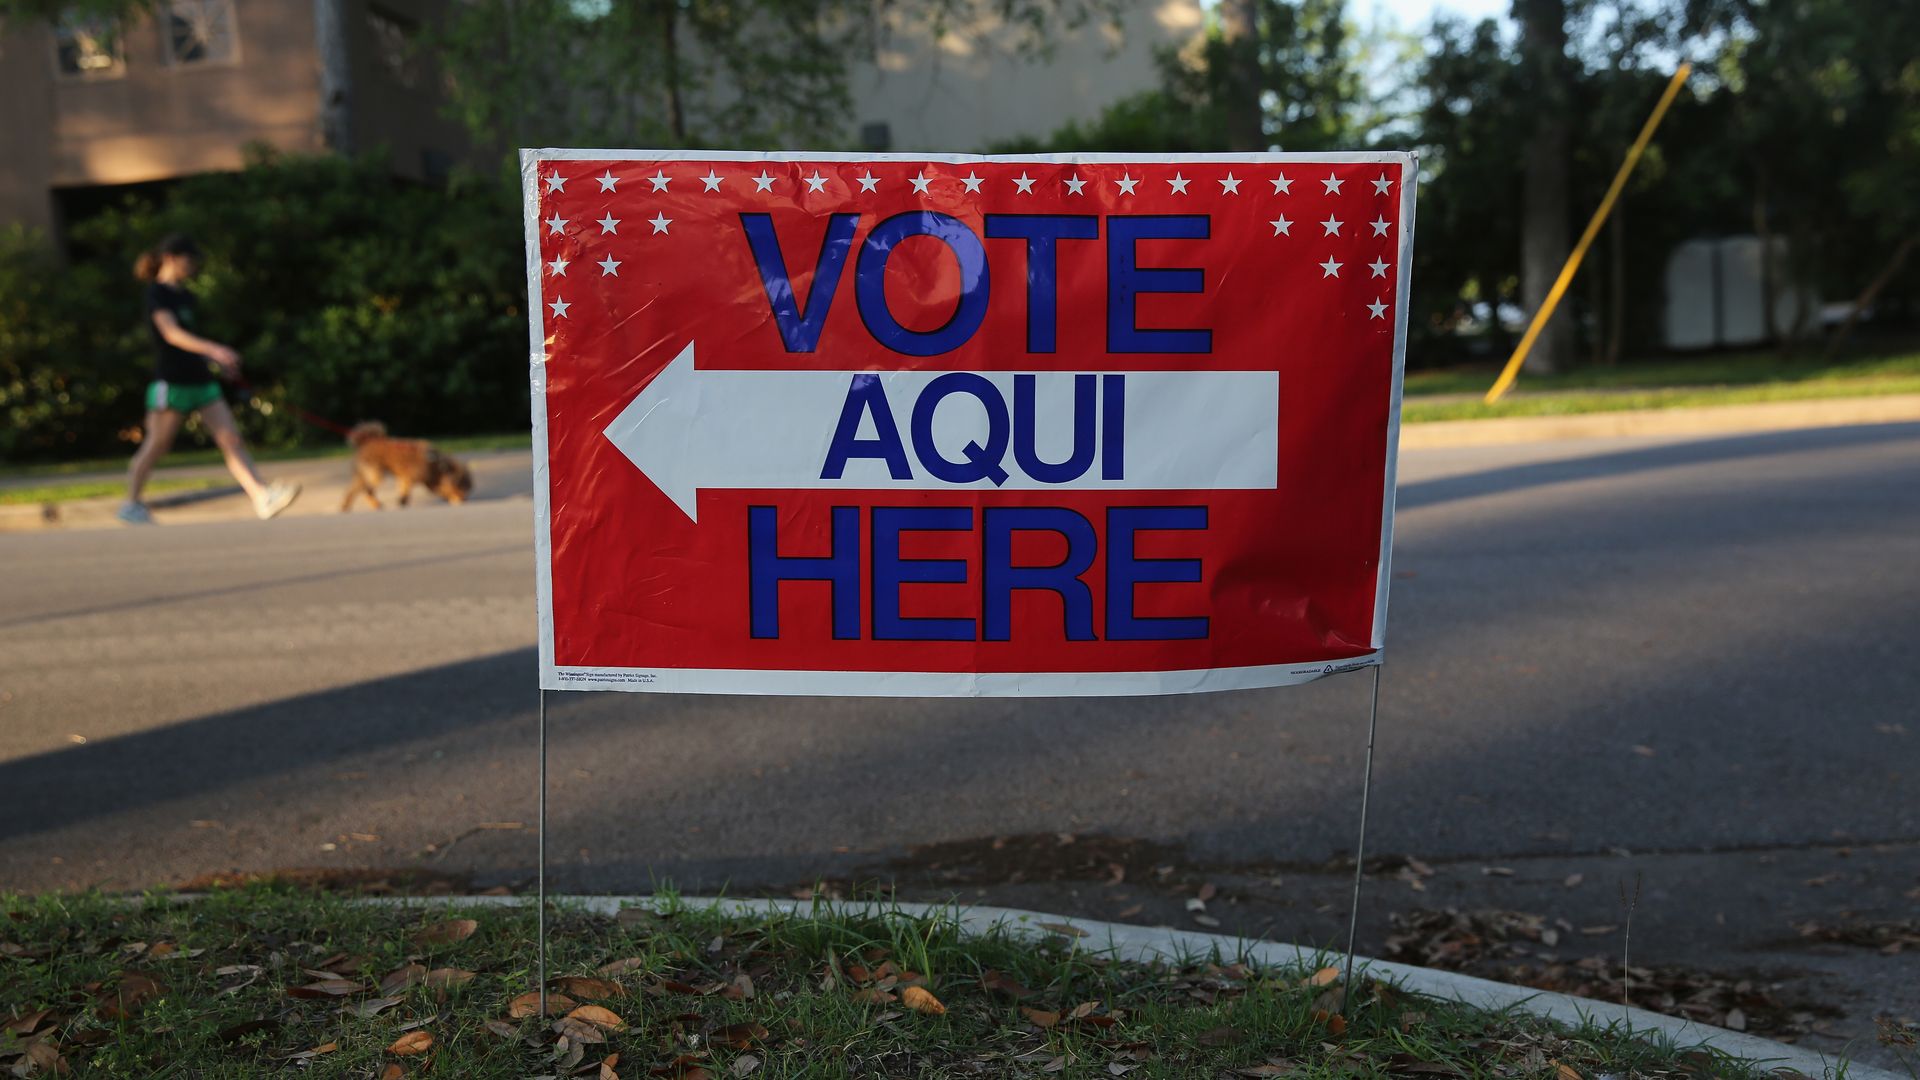 In this image, a sign reads "Vote Aqui Here" on a lawn in a neighborhood.